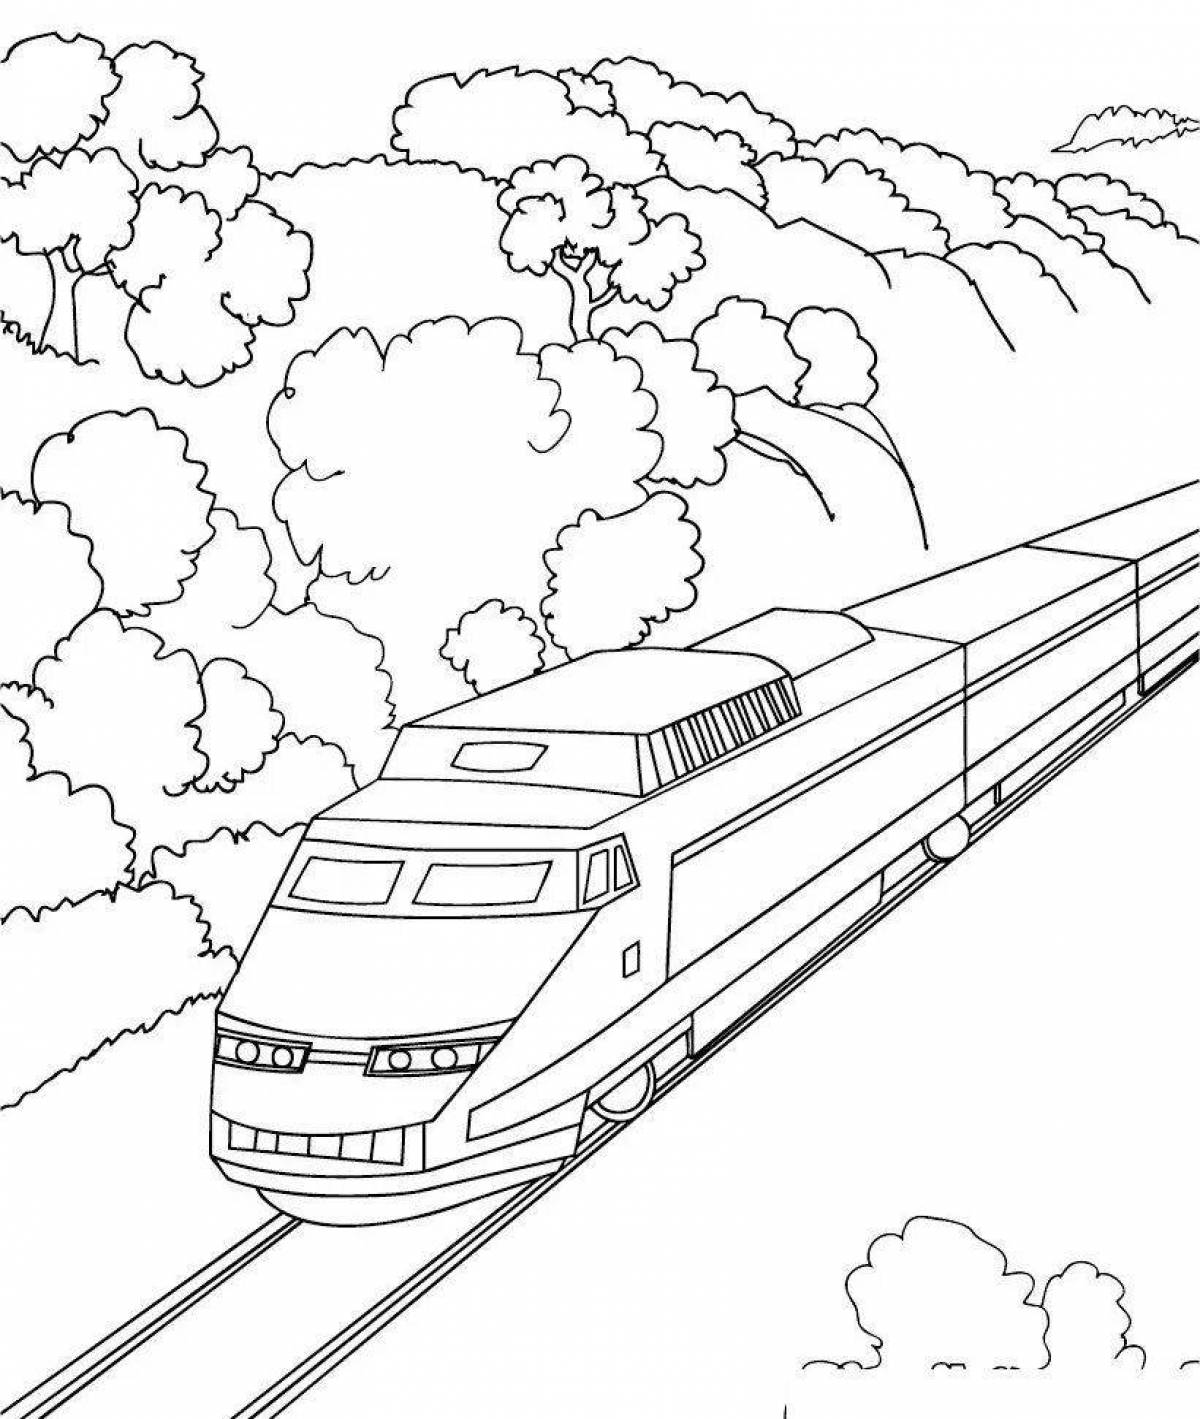 Bright railway coloring book for kids